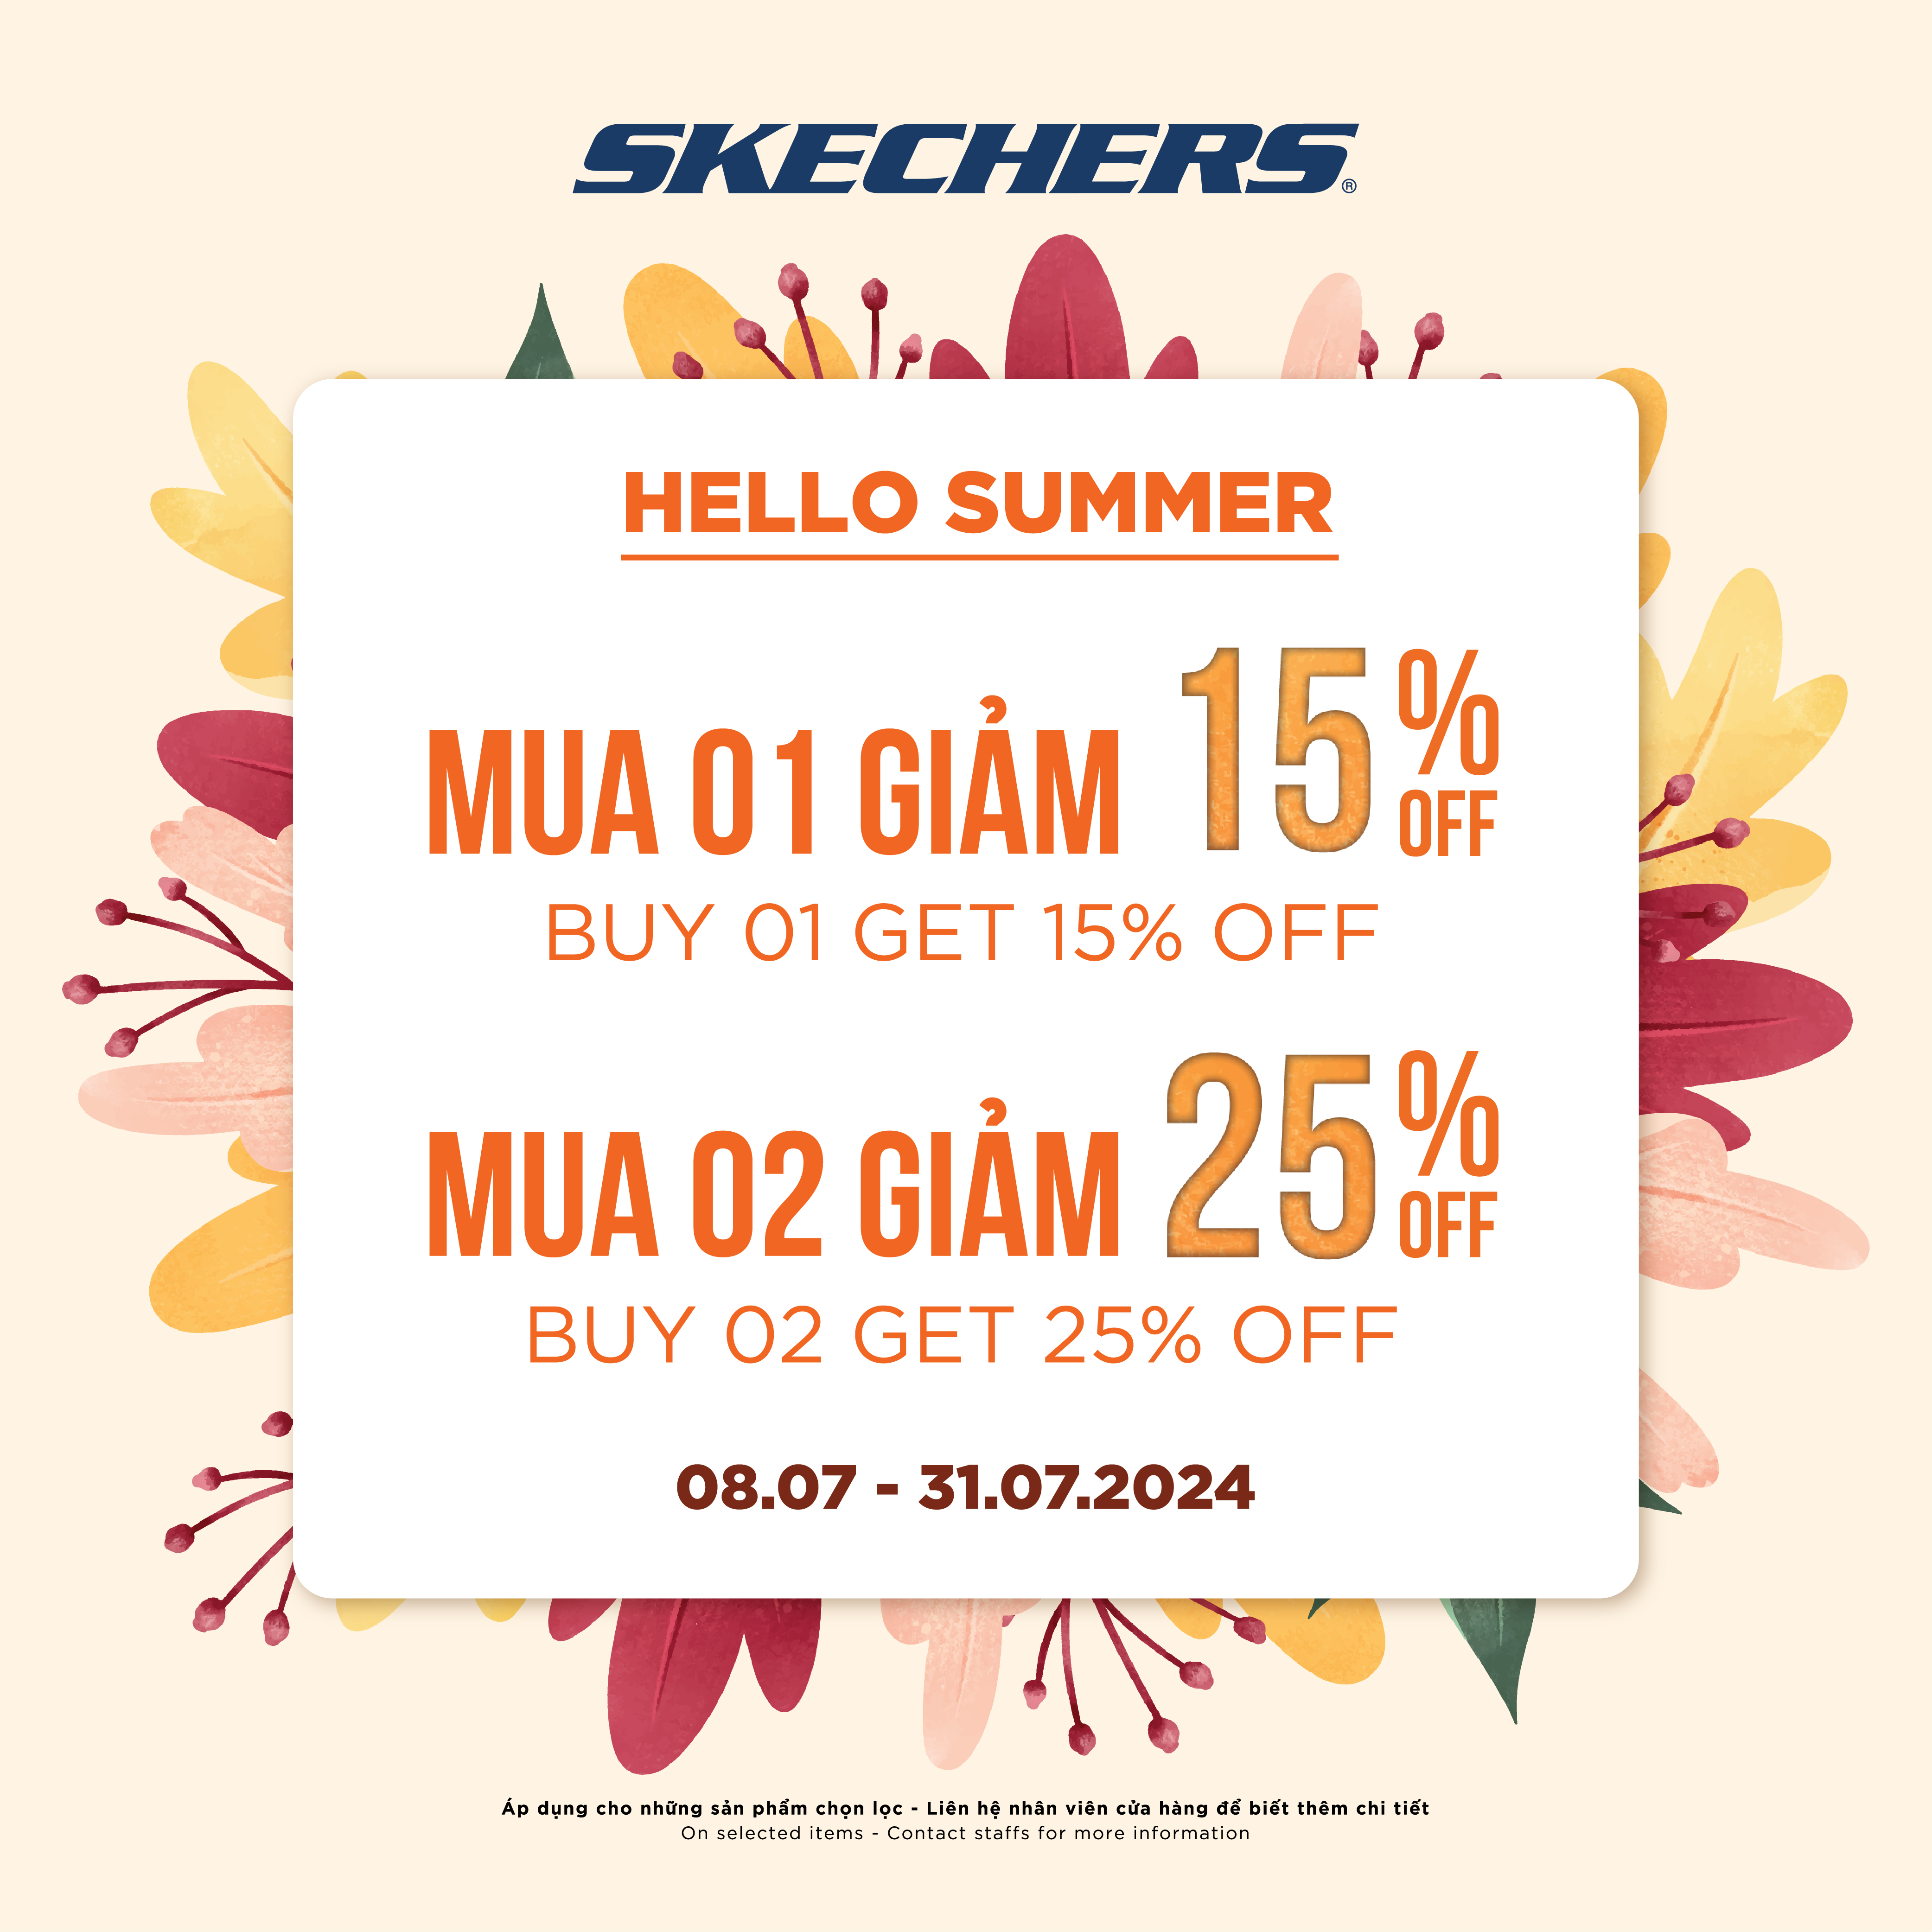 HELLO SUMMER WITH HOT DEALS FROM SKECHERS